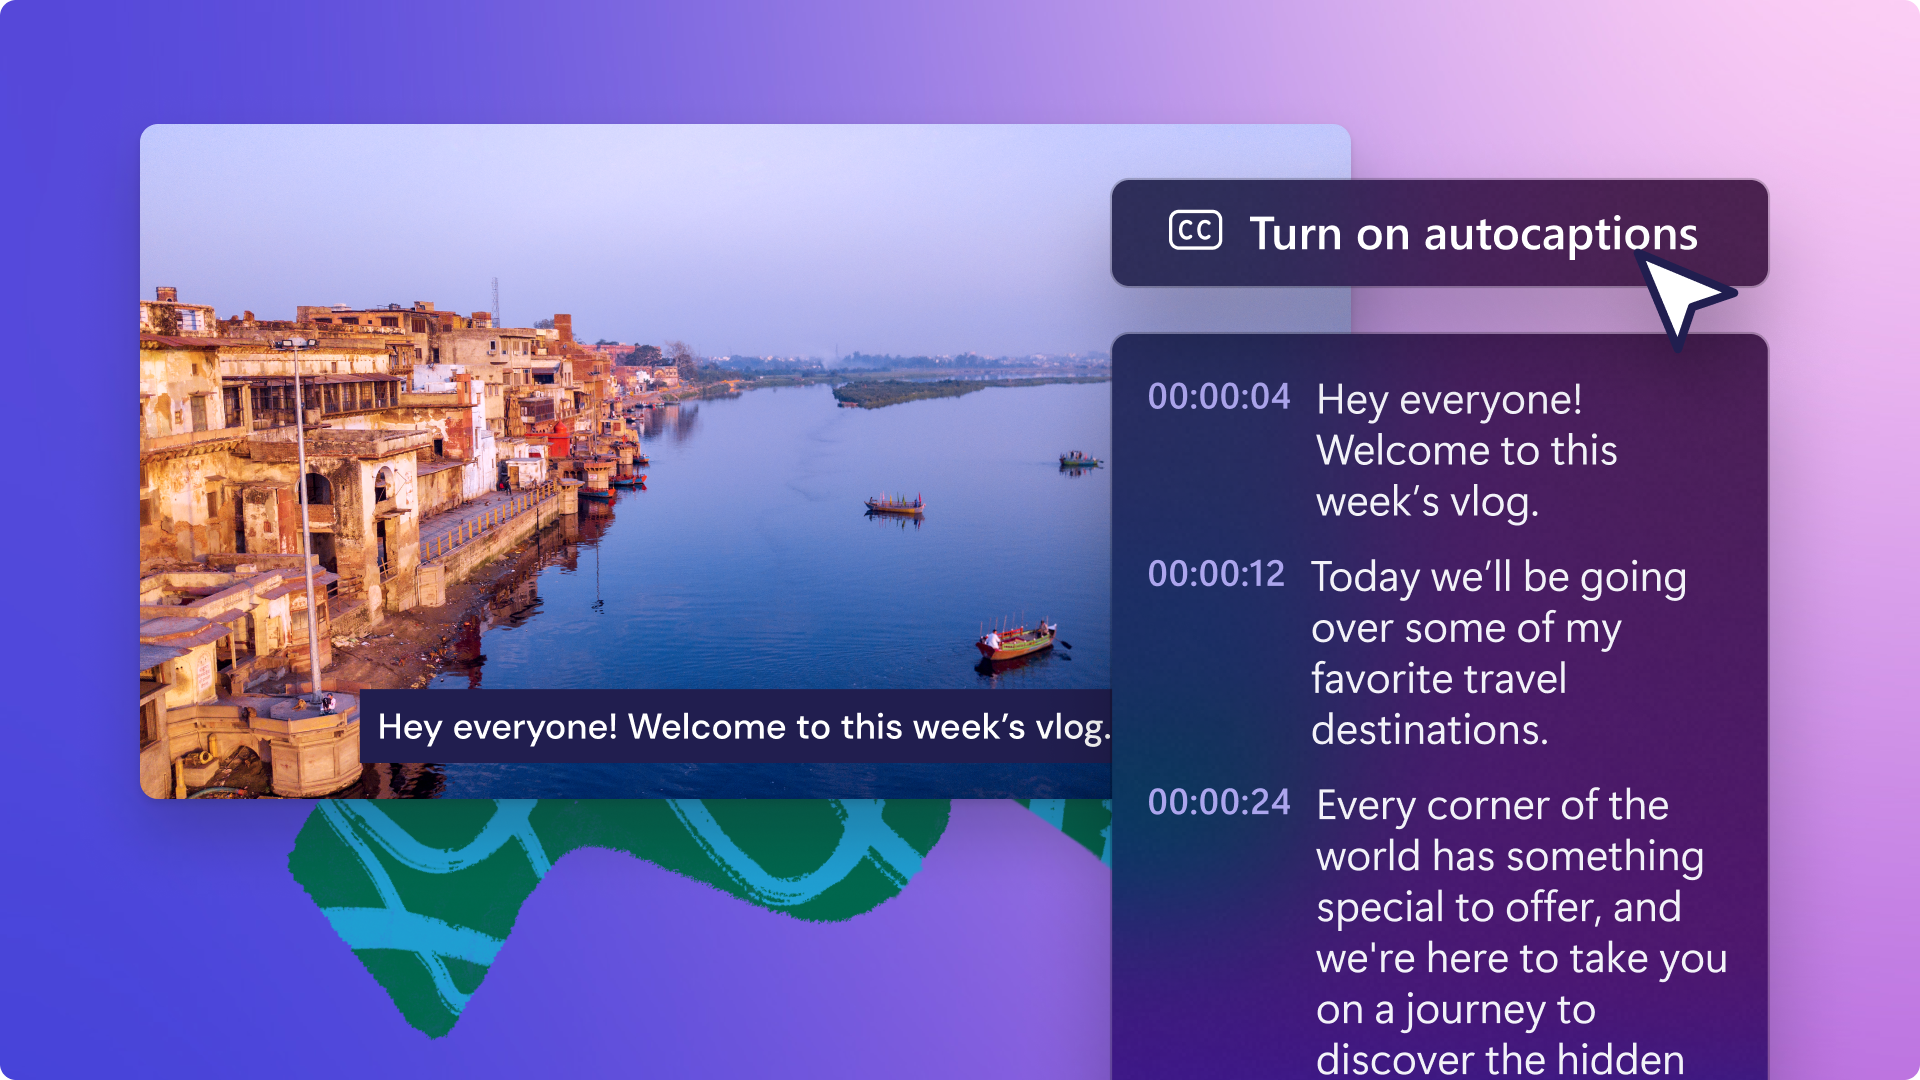 An image of the autocaptions feature.